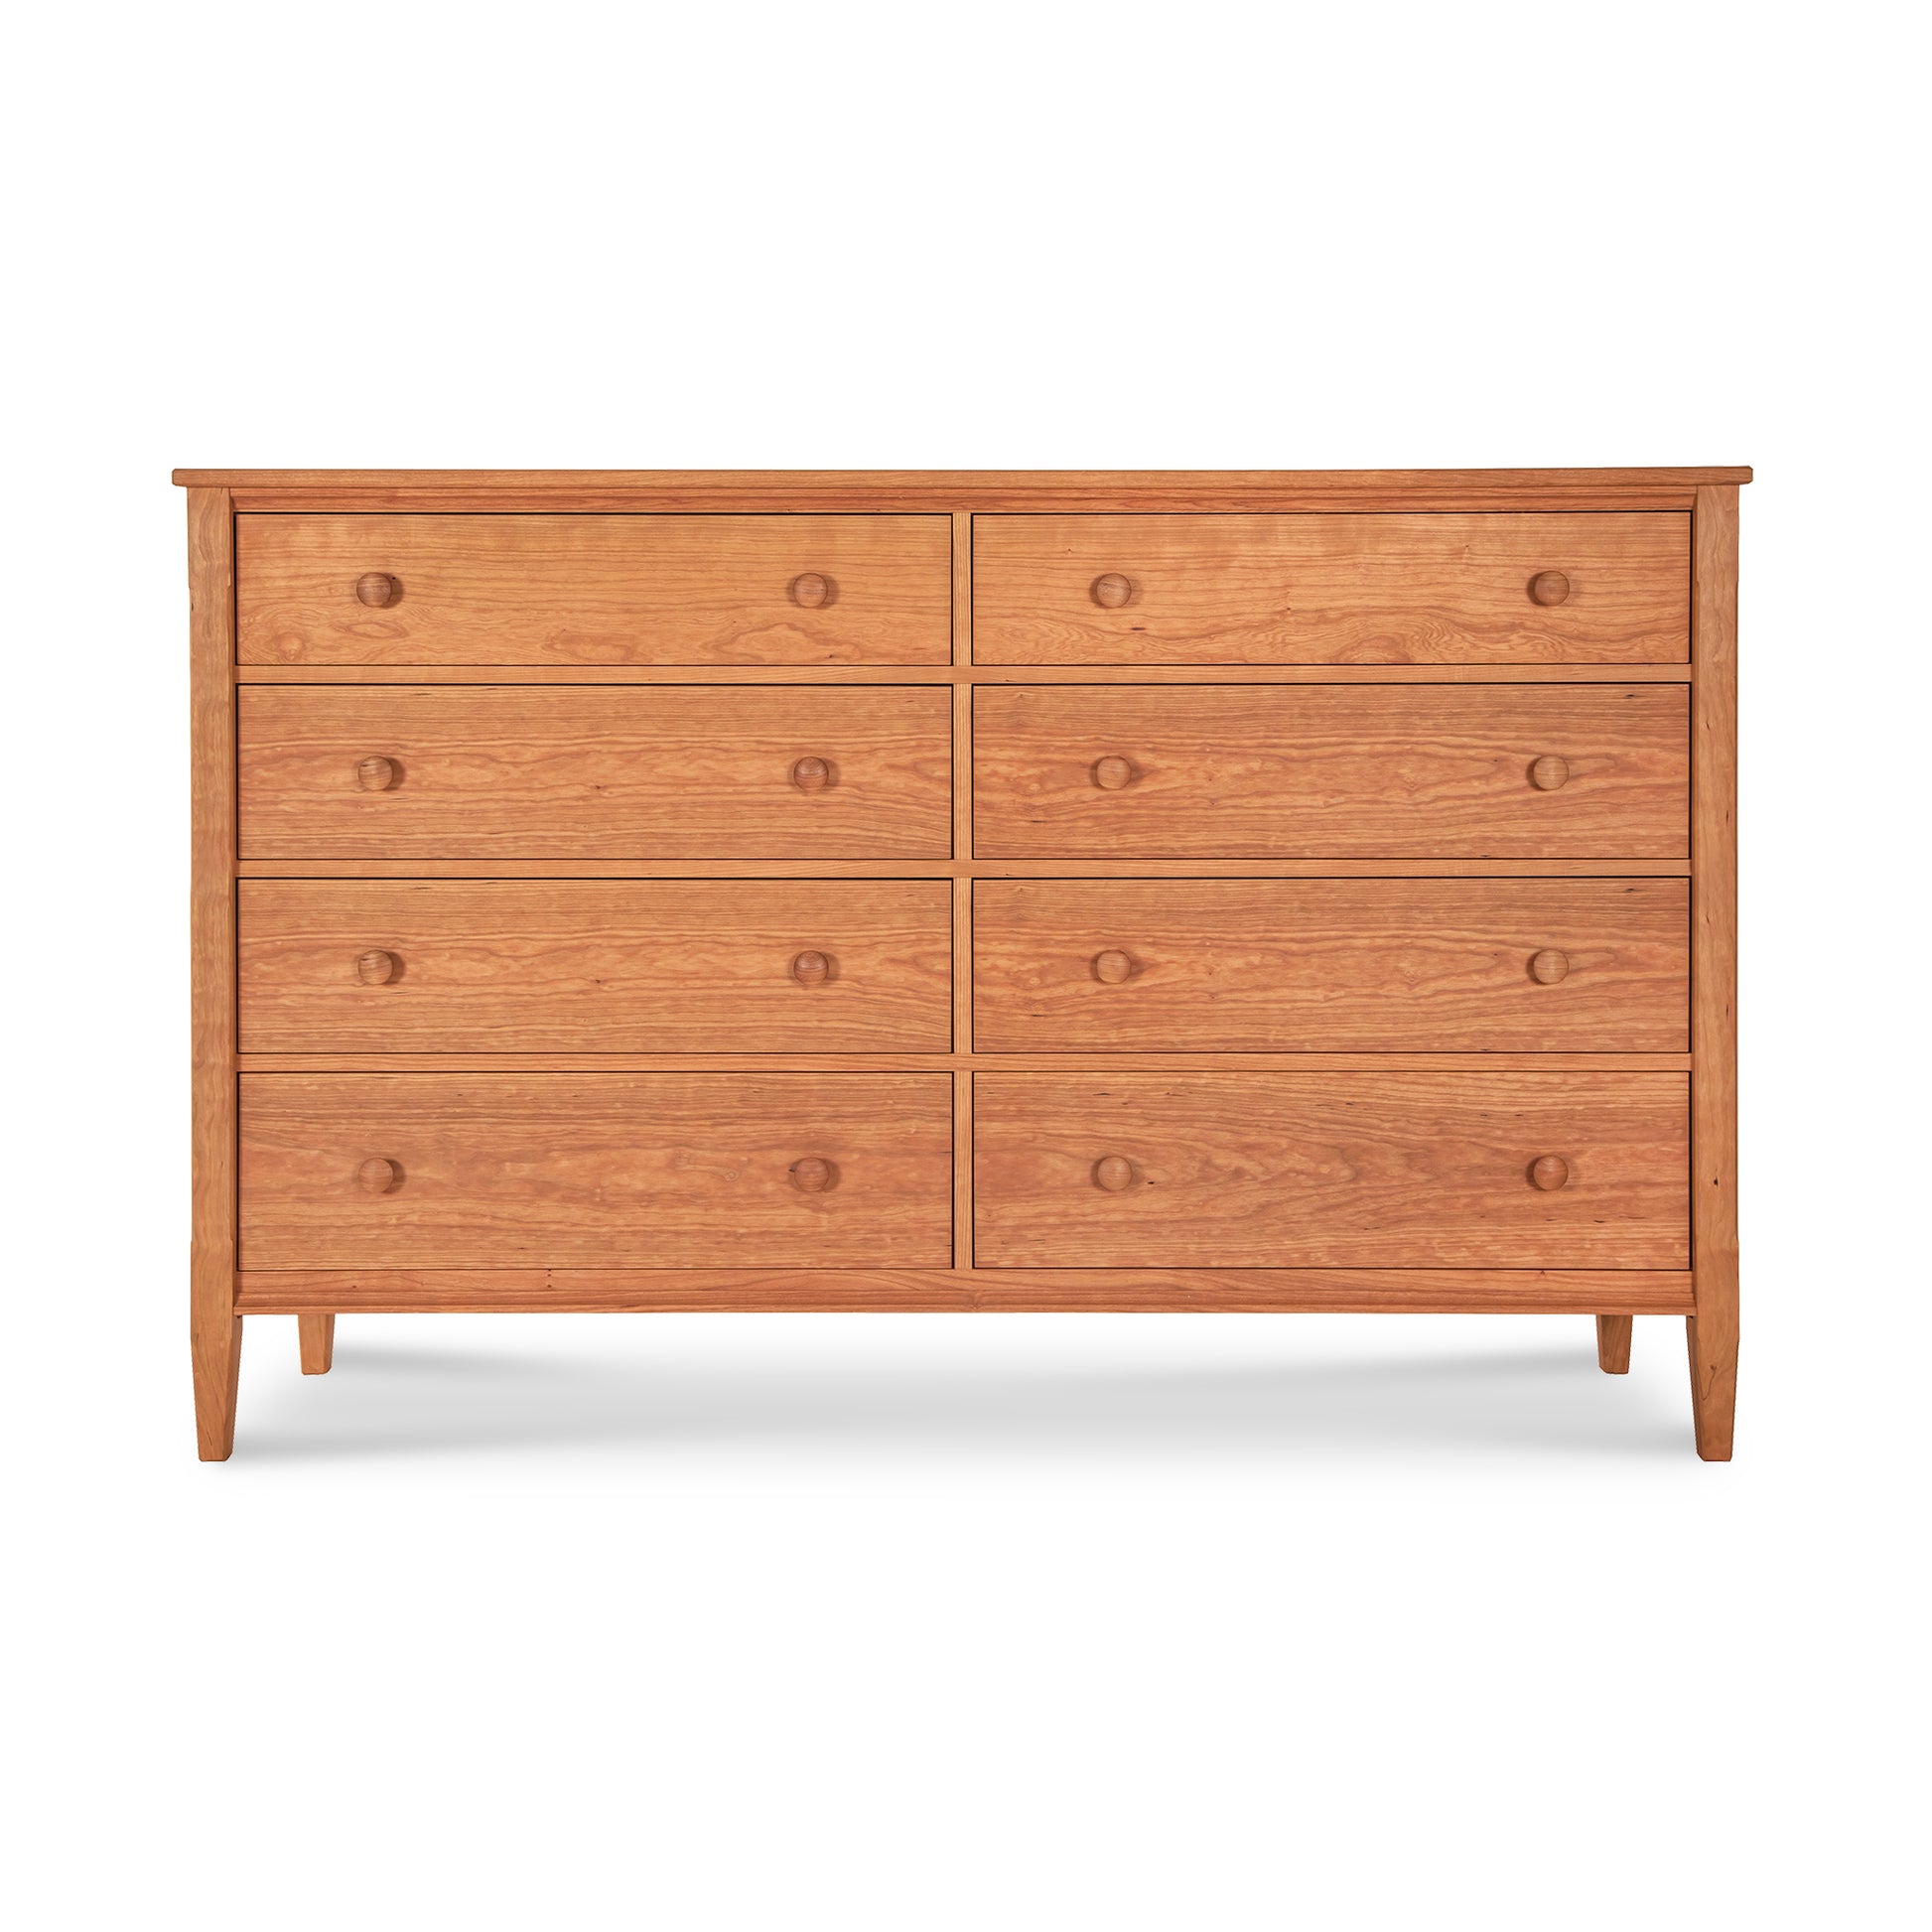 A Maple Corner Woodworks Vermont Shaker 8-Drawer Dresser with drawers on a white background.